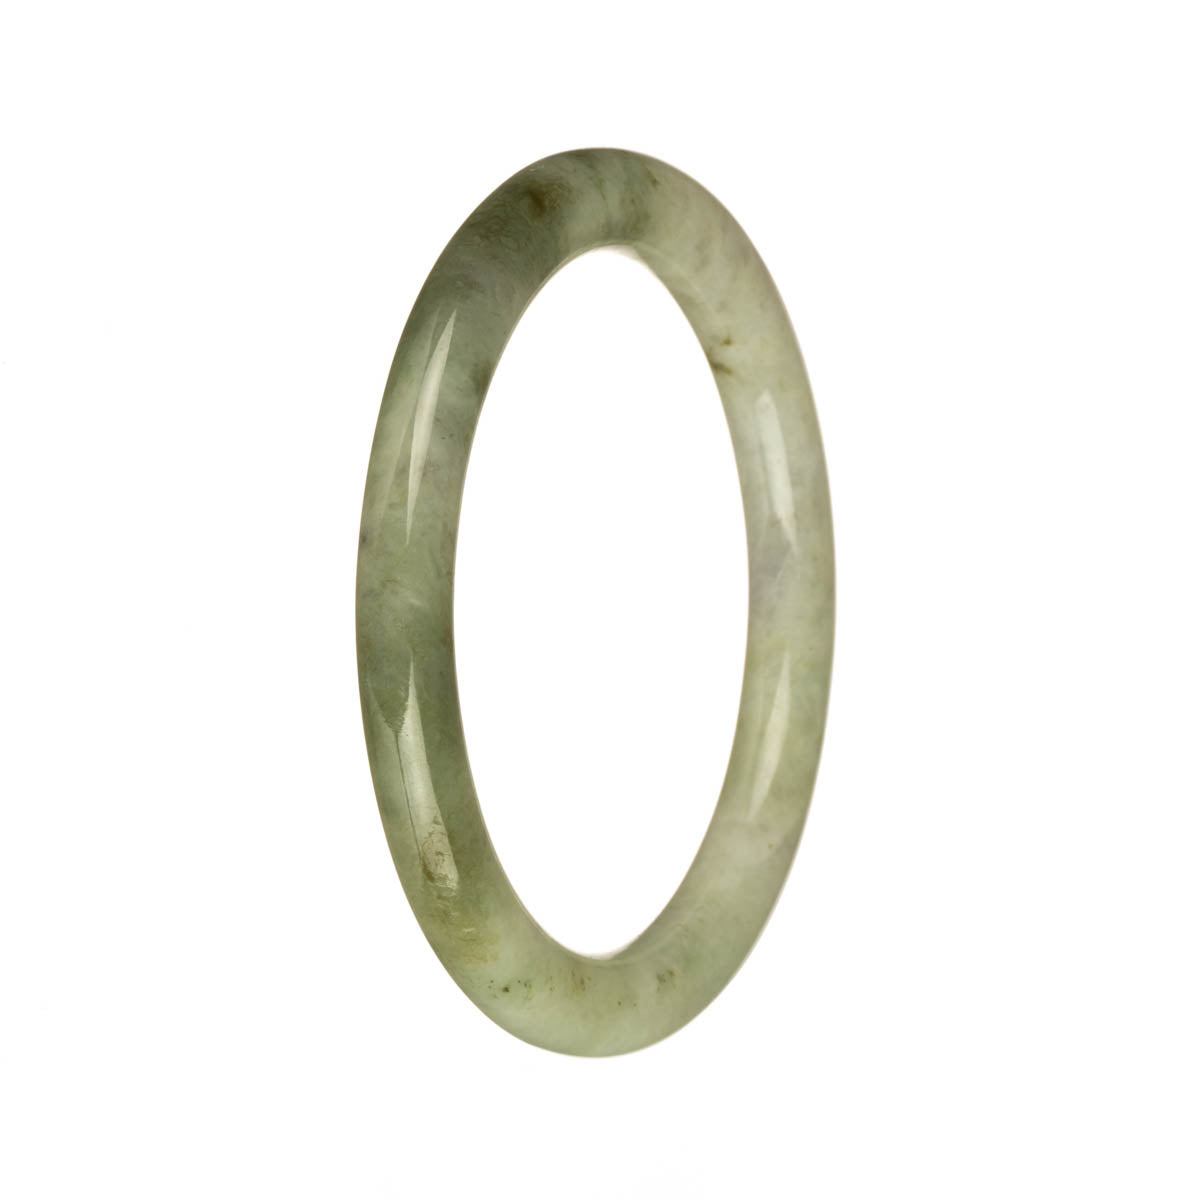 A small round jade bangle in light grey and pale green colors, featuring intricate olive green patterns. Certified Grade A quality. Perfect for those with petite wrists, measuring 55mm in size. Created by MAYS.